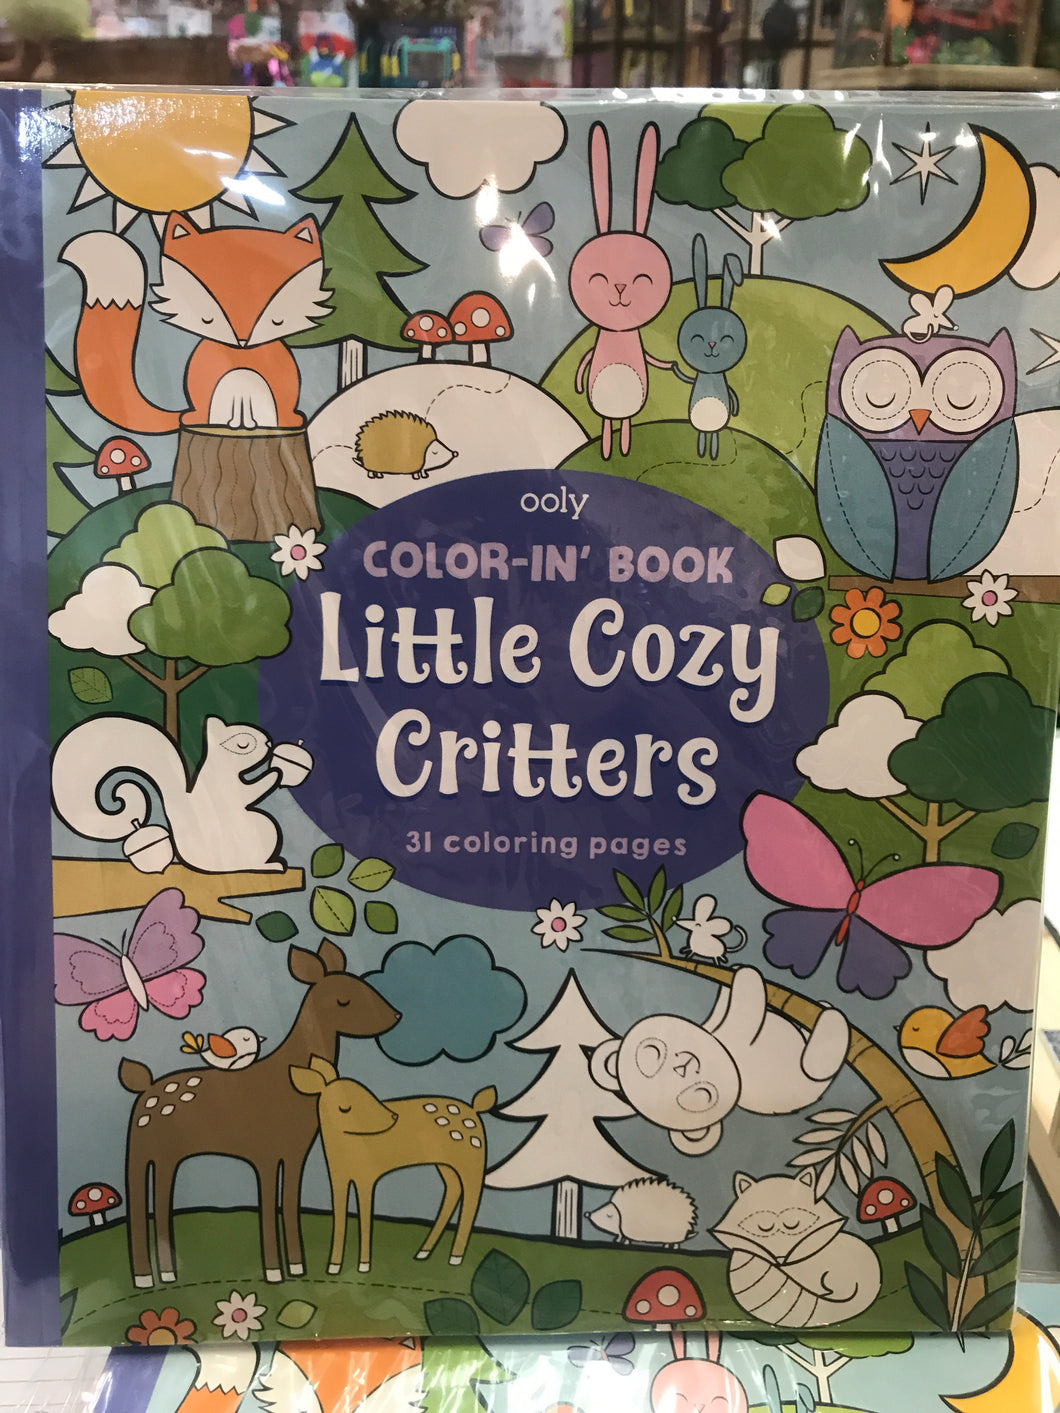 ooly - Little Cozy Critters Color-in’ Book